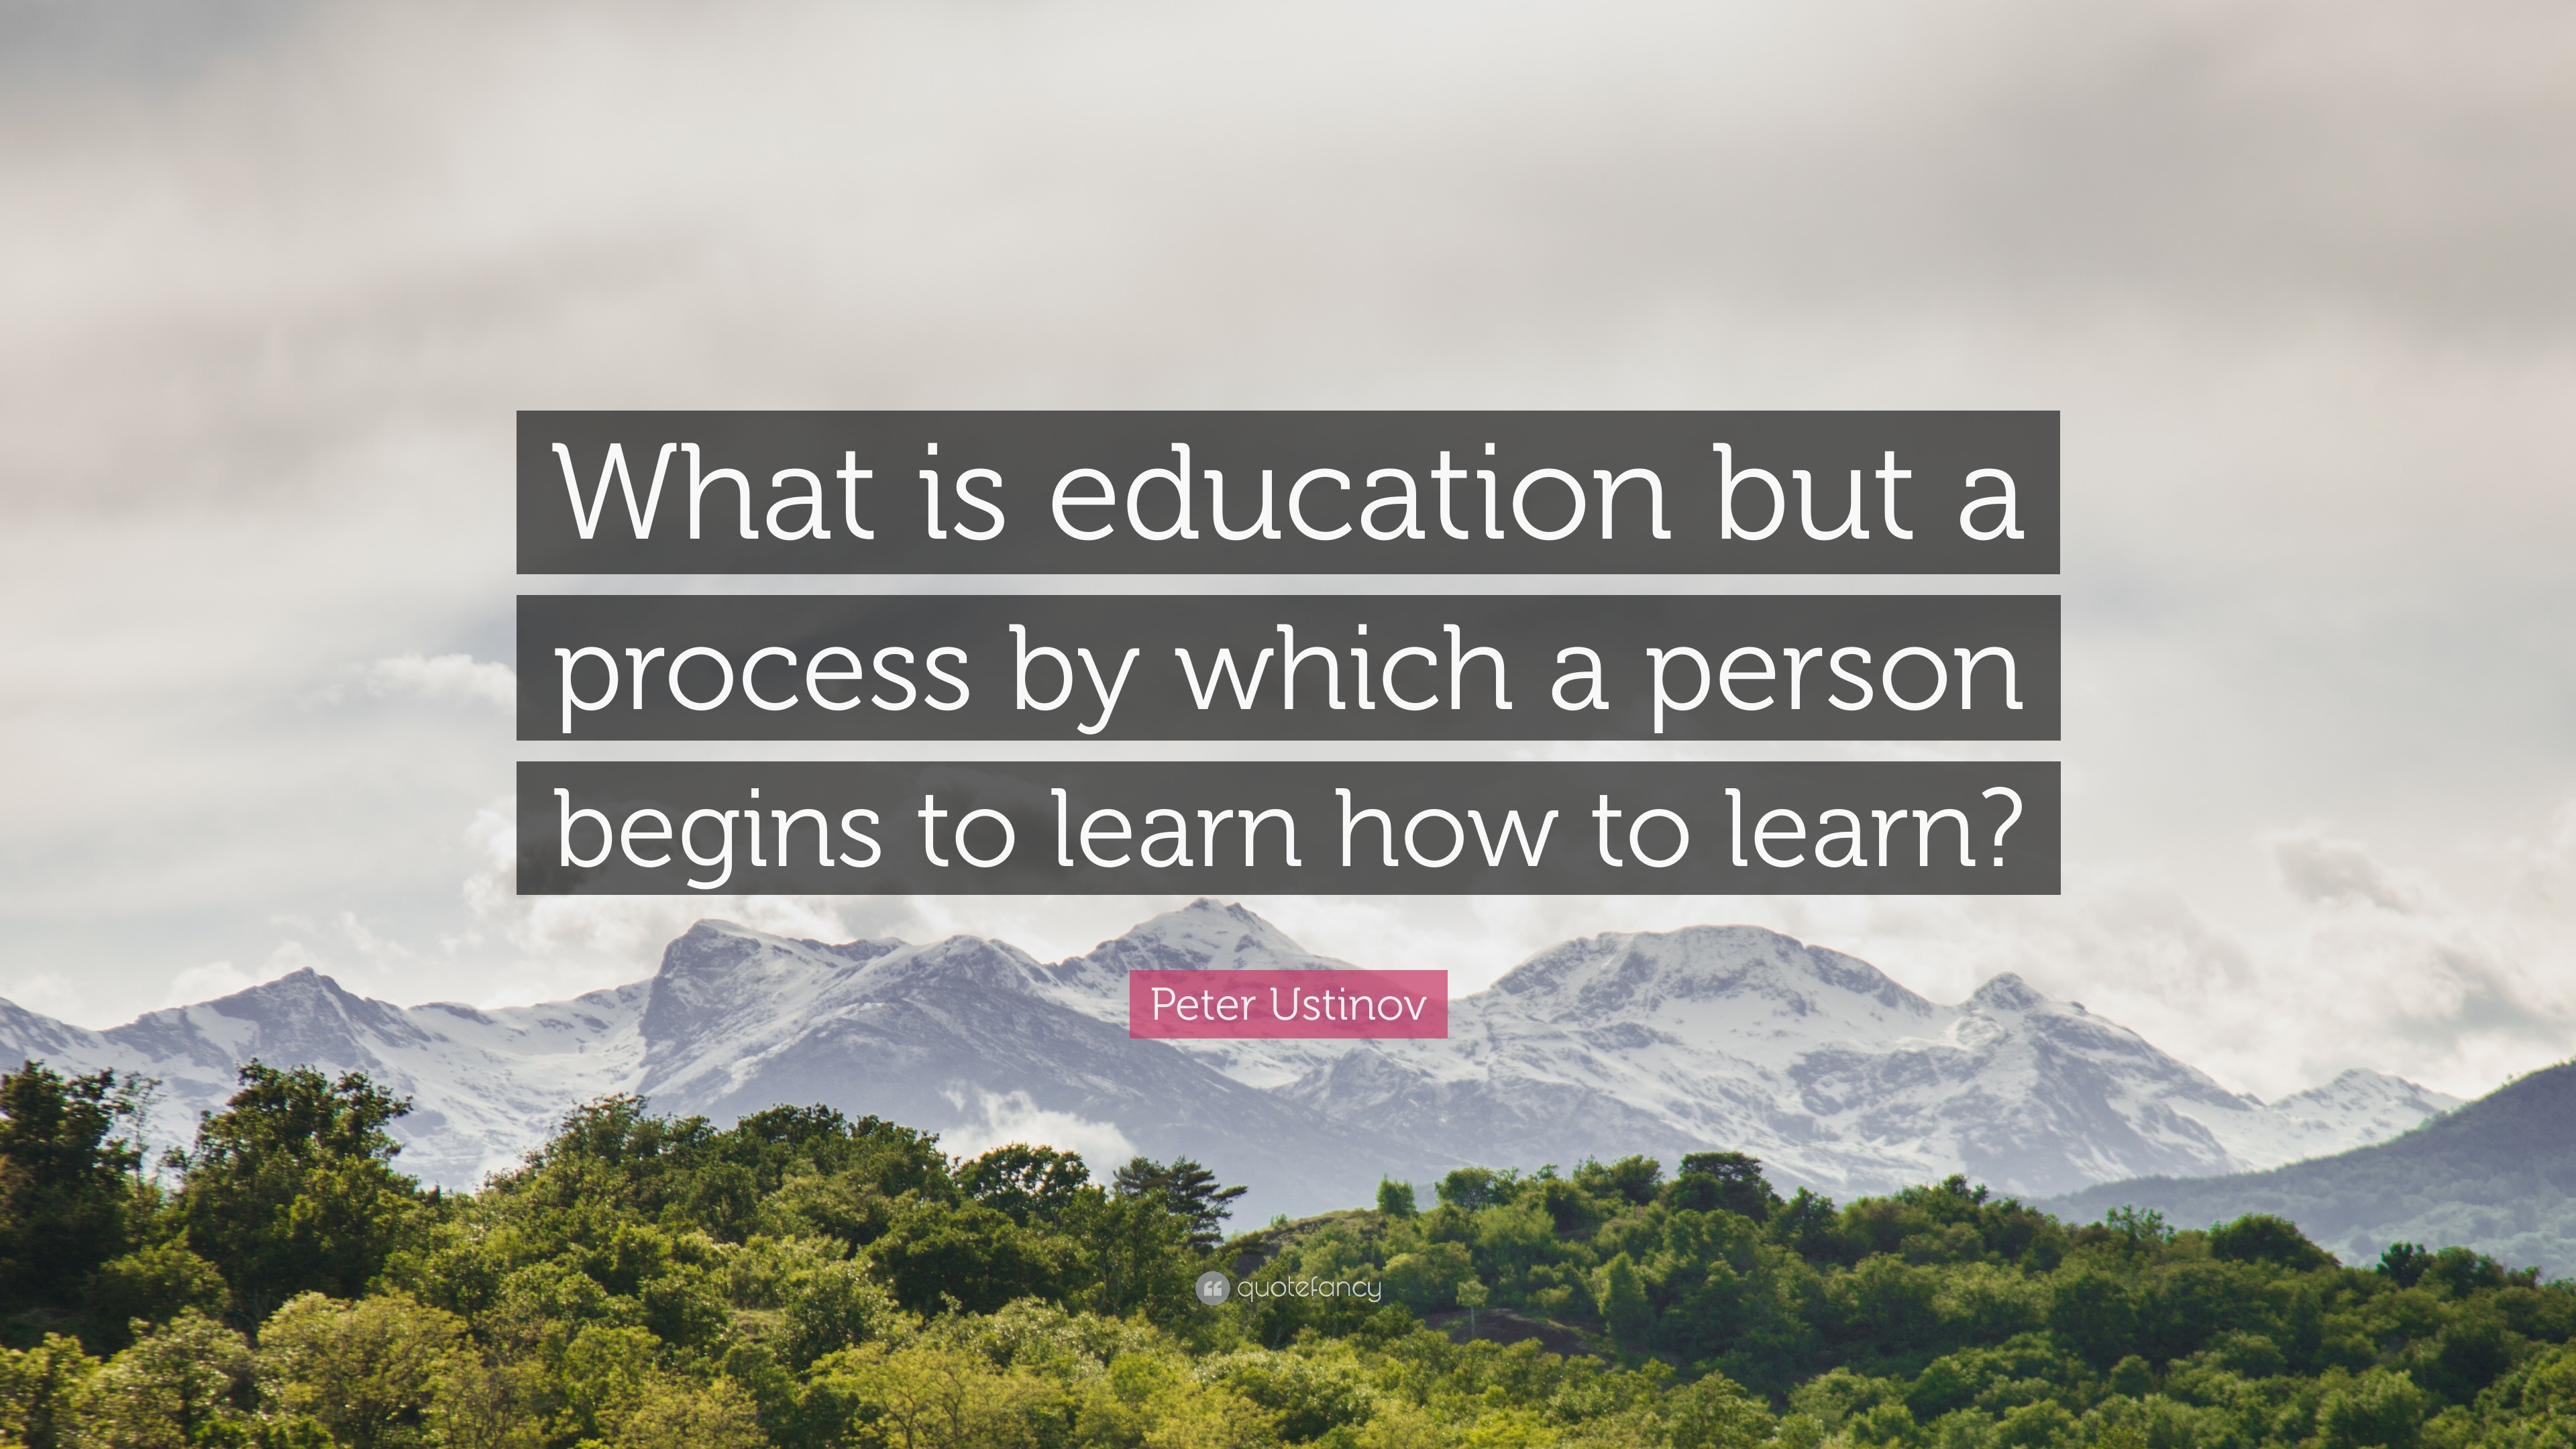 Peter Ustinov Quote: “What is education but a process by which a person ...